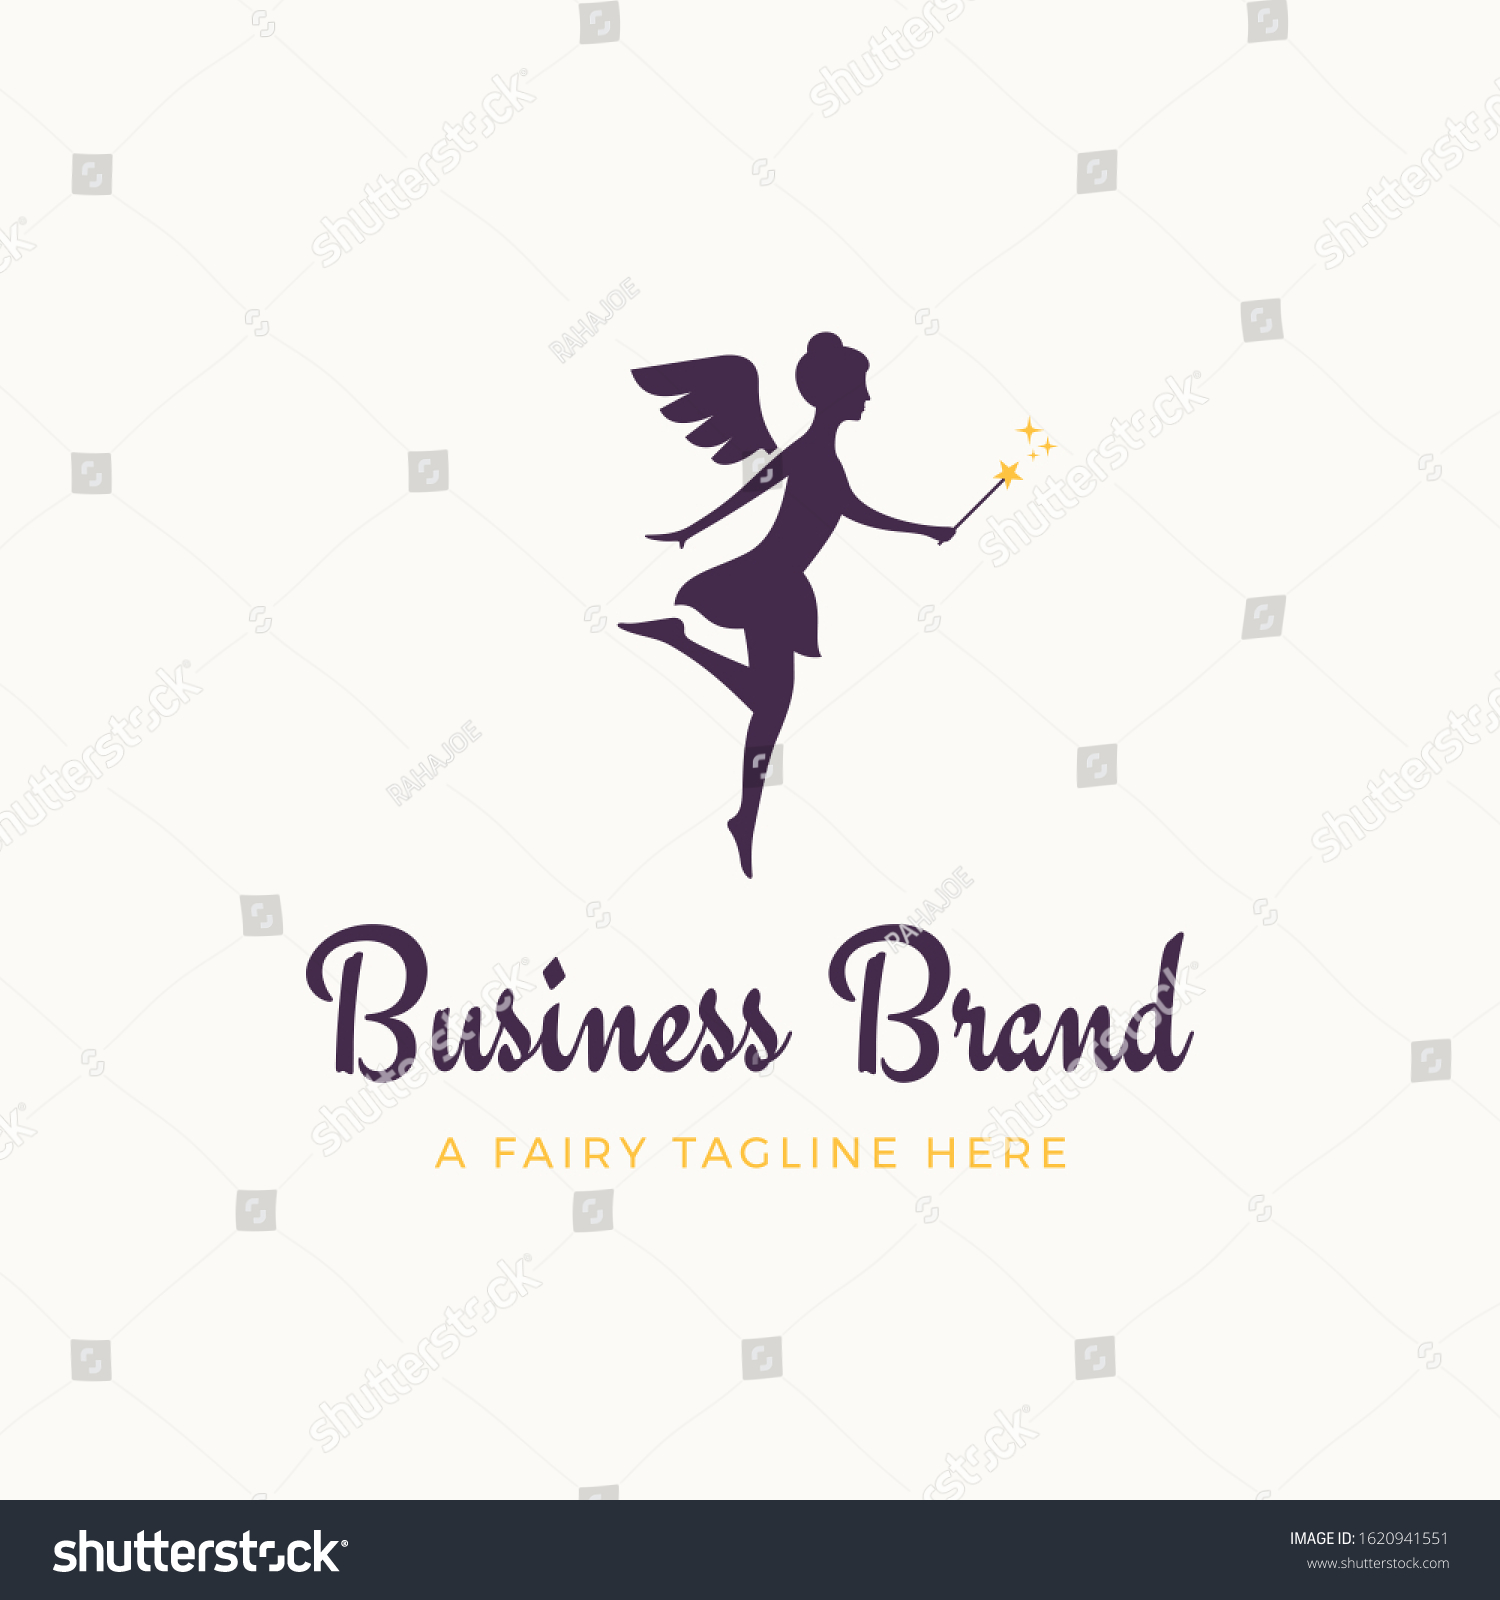 Simple Yet Sophisticated Logo Design Displaying Stock Vector (Royalty ...